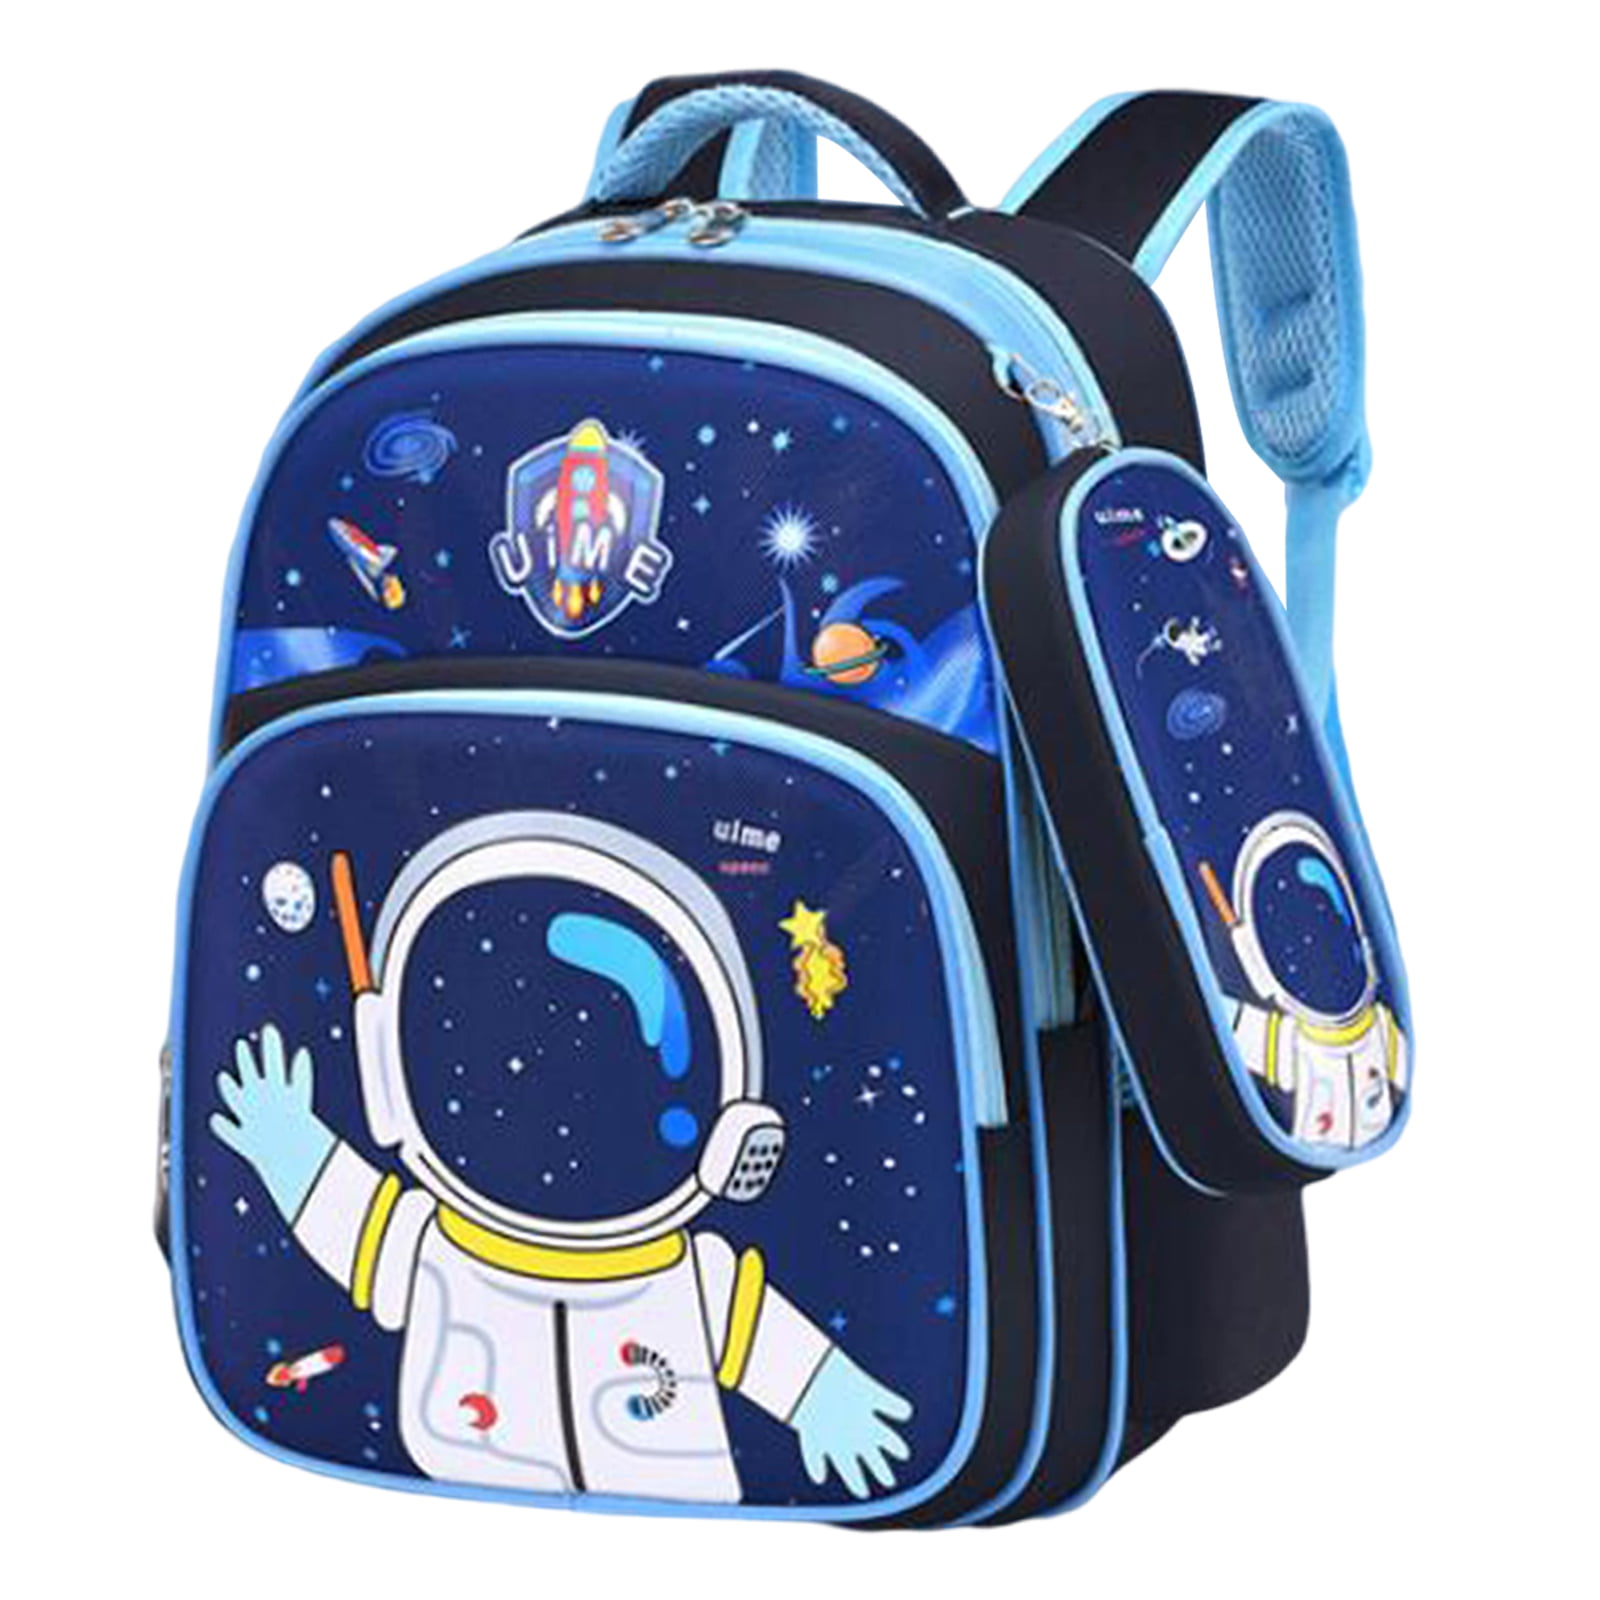 Astronaut Casual Backpack School Bag Computer Book Bag Travel Hiking Camping Daypack for Girls Boys Men and Women 